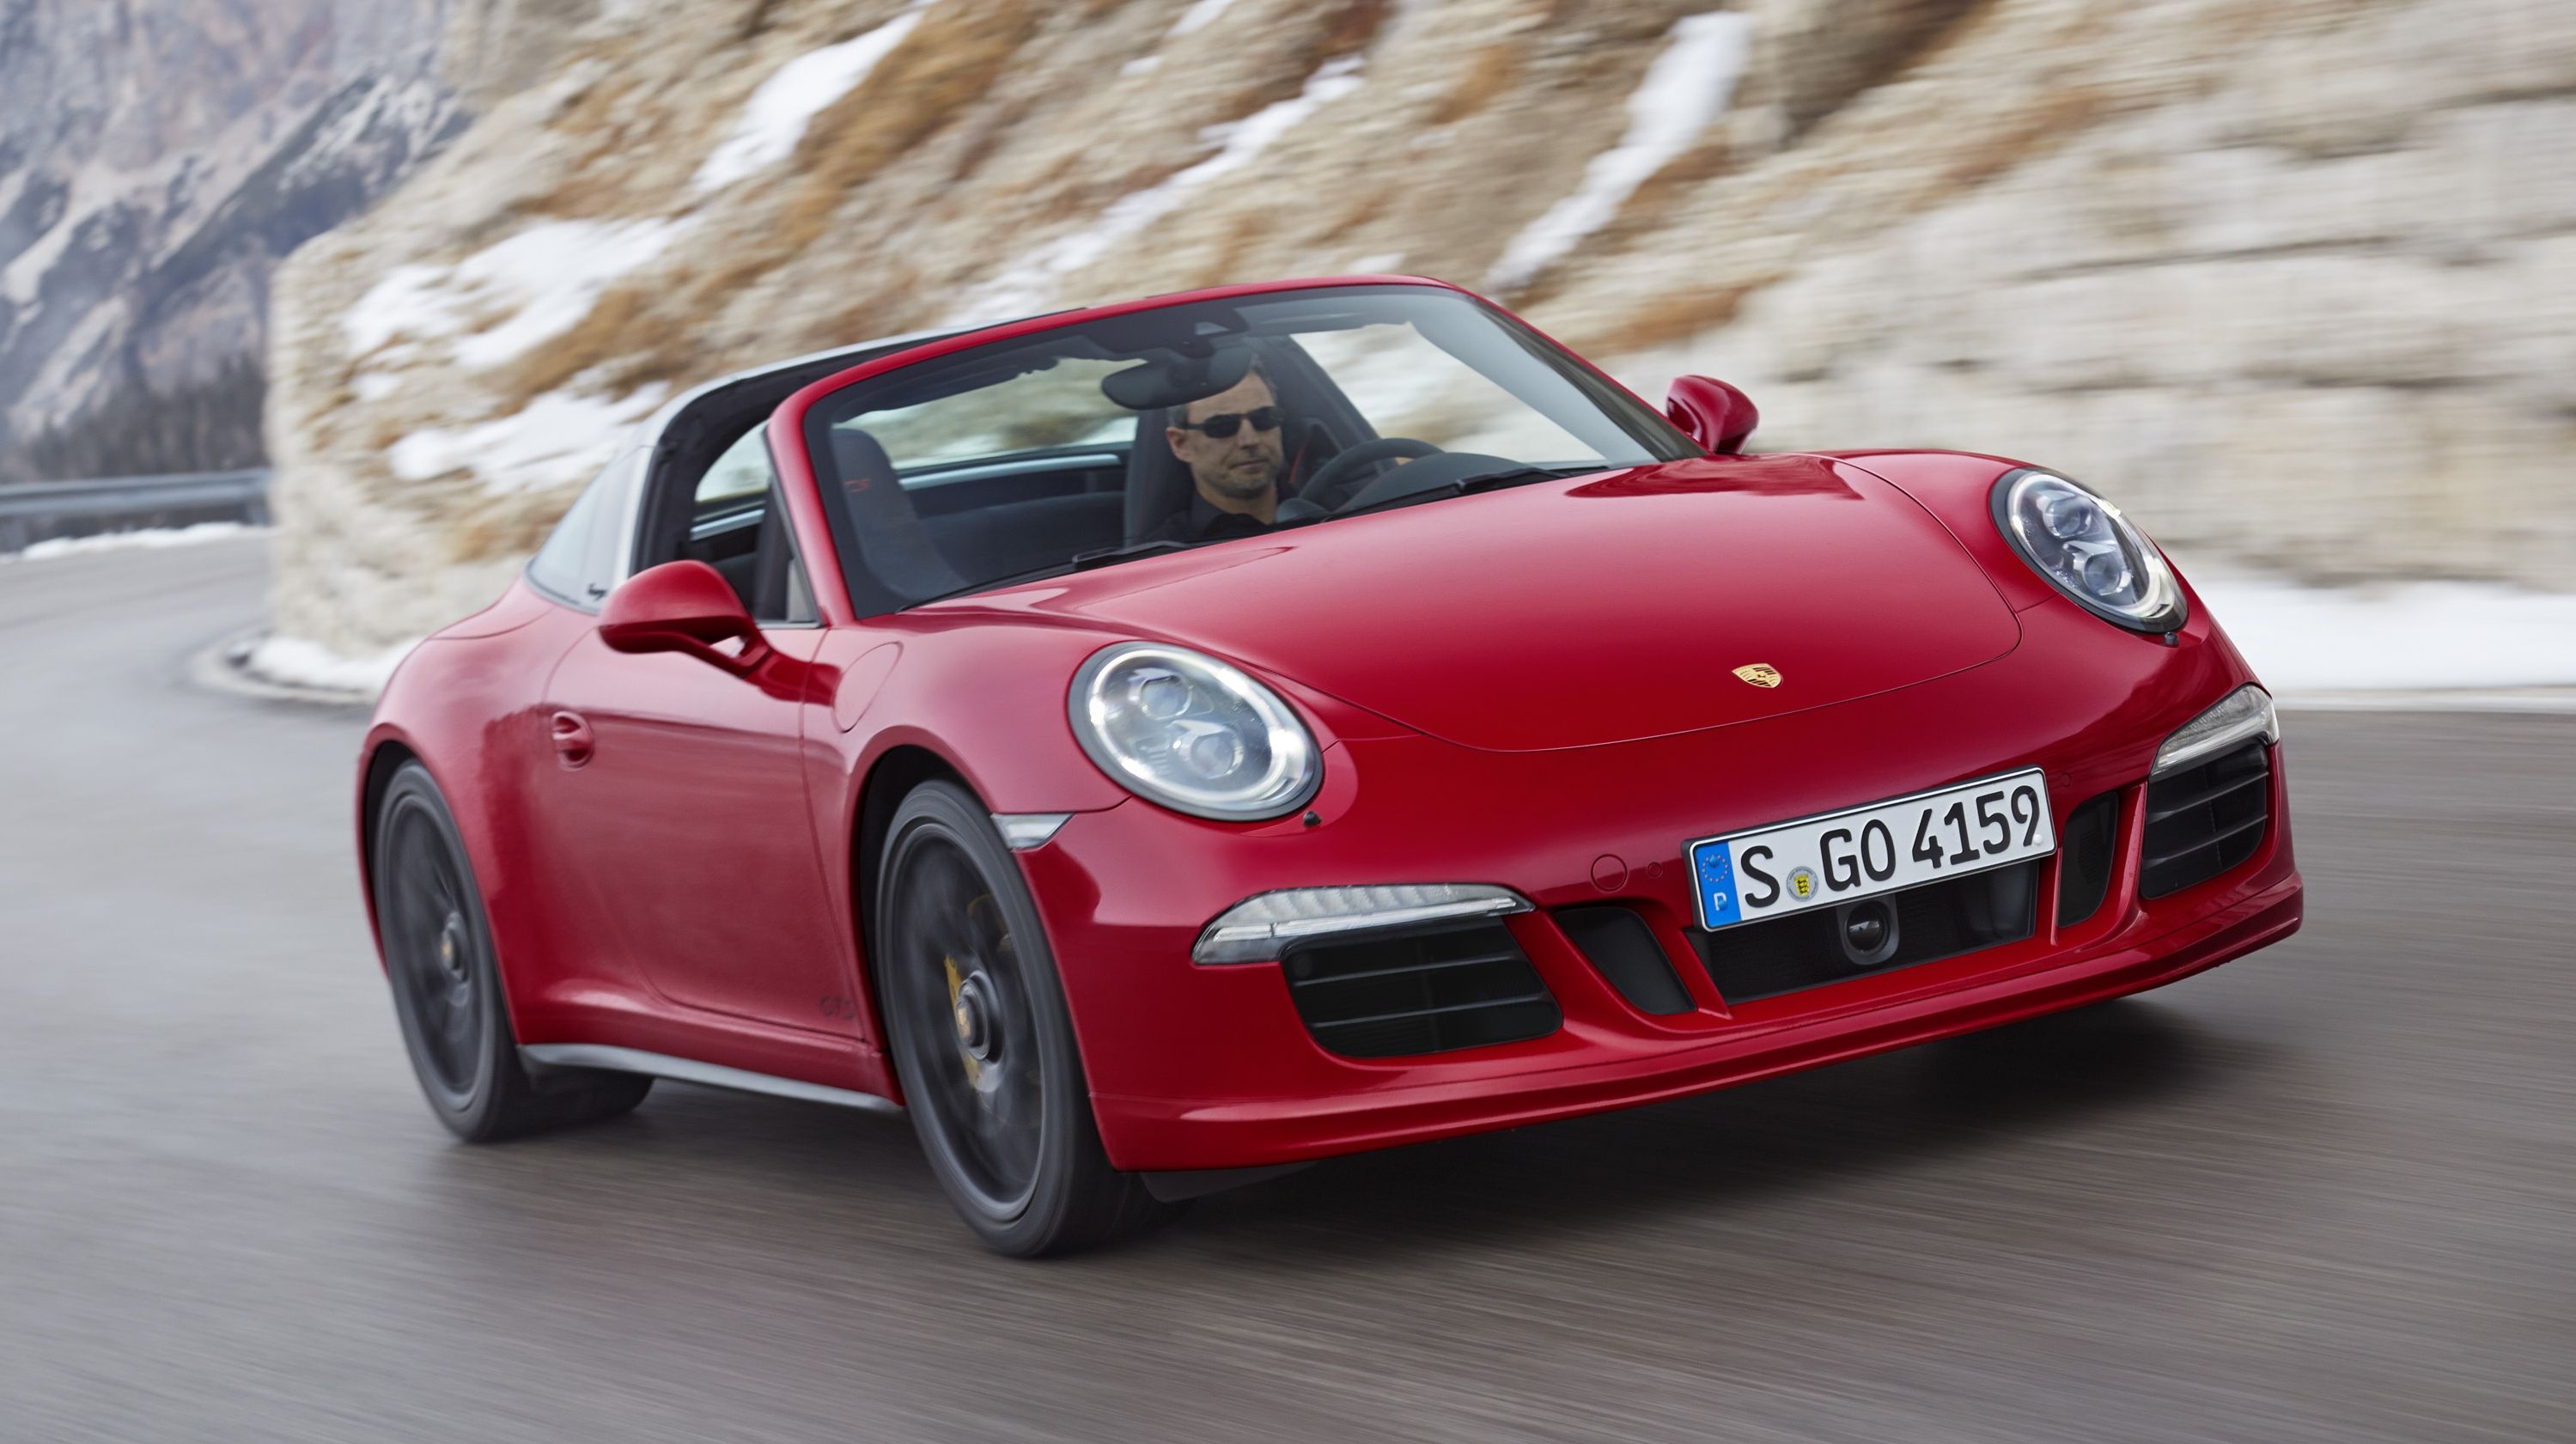  All the added power and fun of a 911 GTS is now availalbe with the unique roof offered by the Targa.